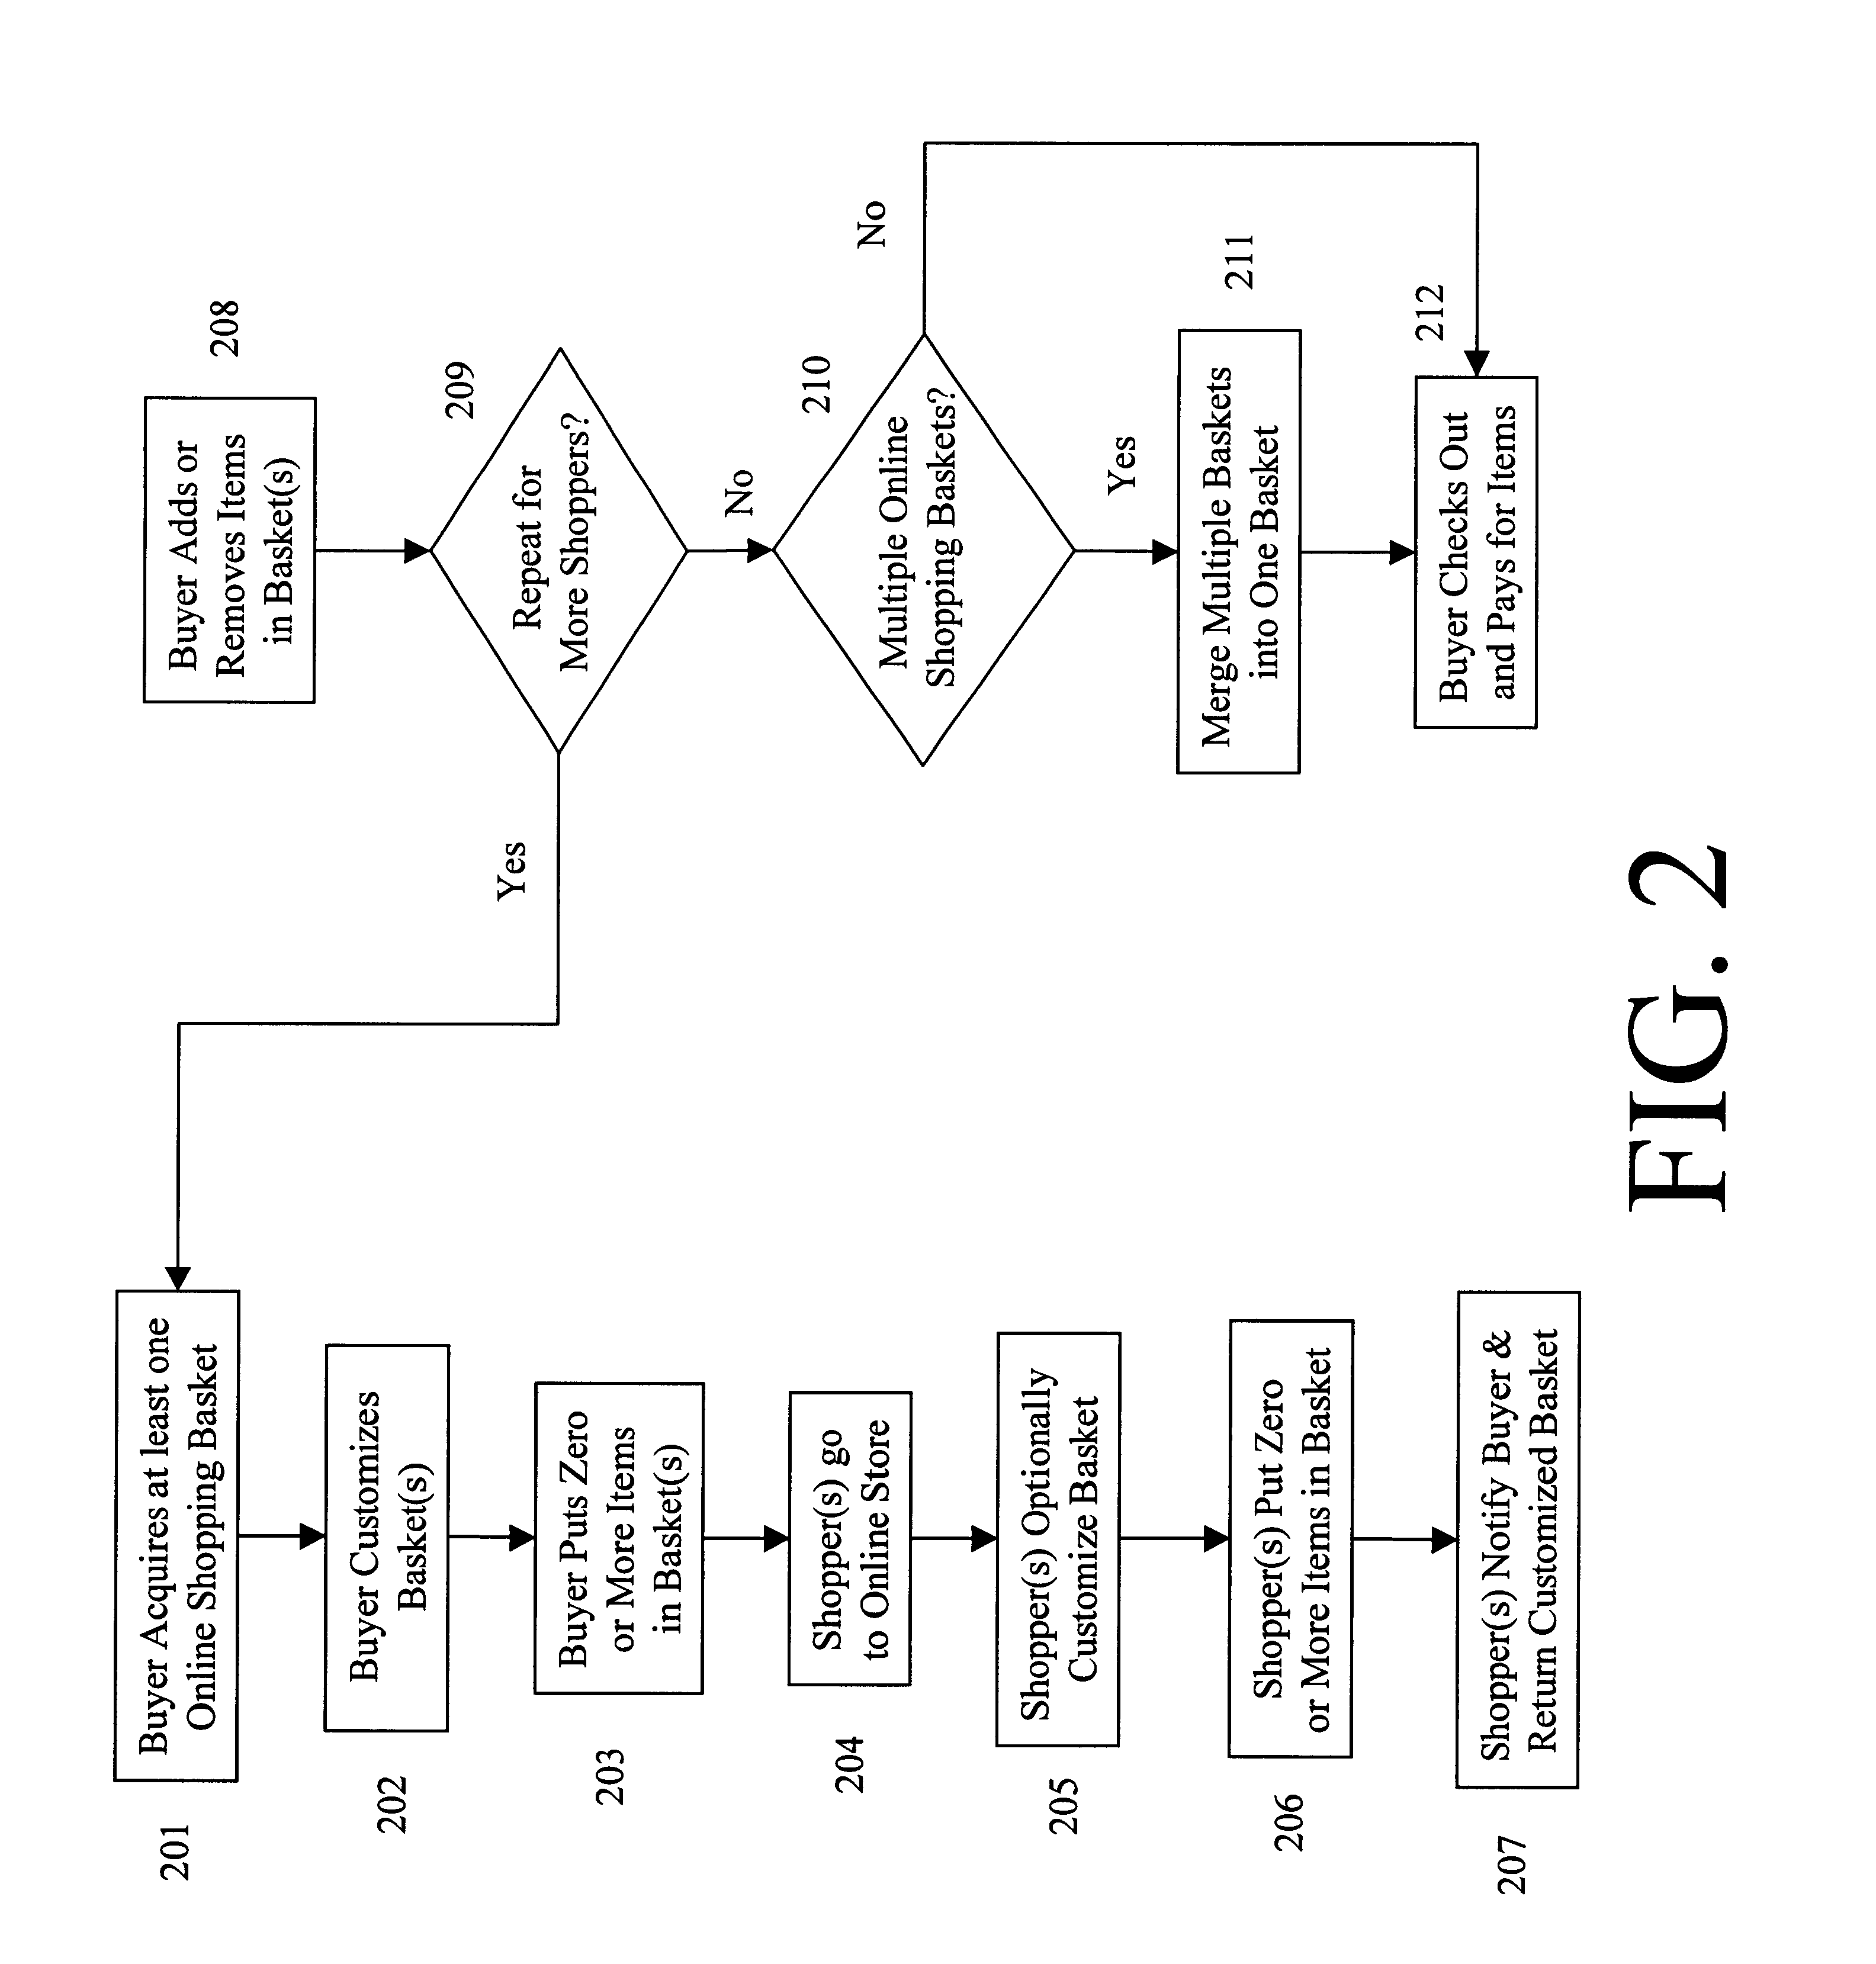 Business process and apparatus for online purchases using a rule-based transferable shopping basket